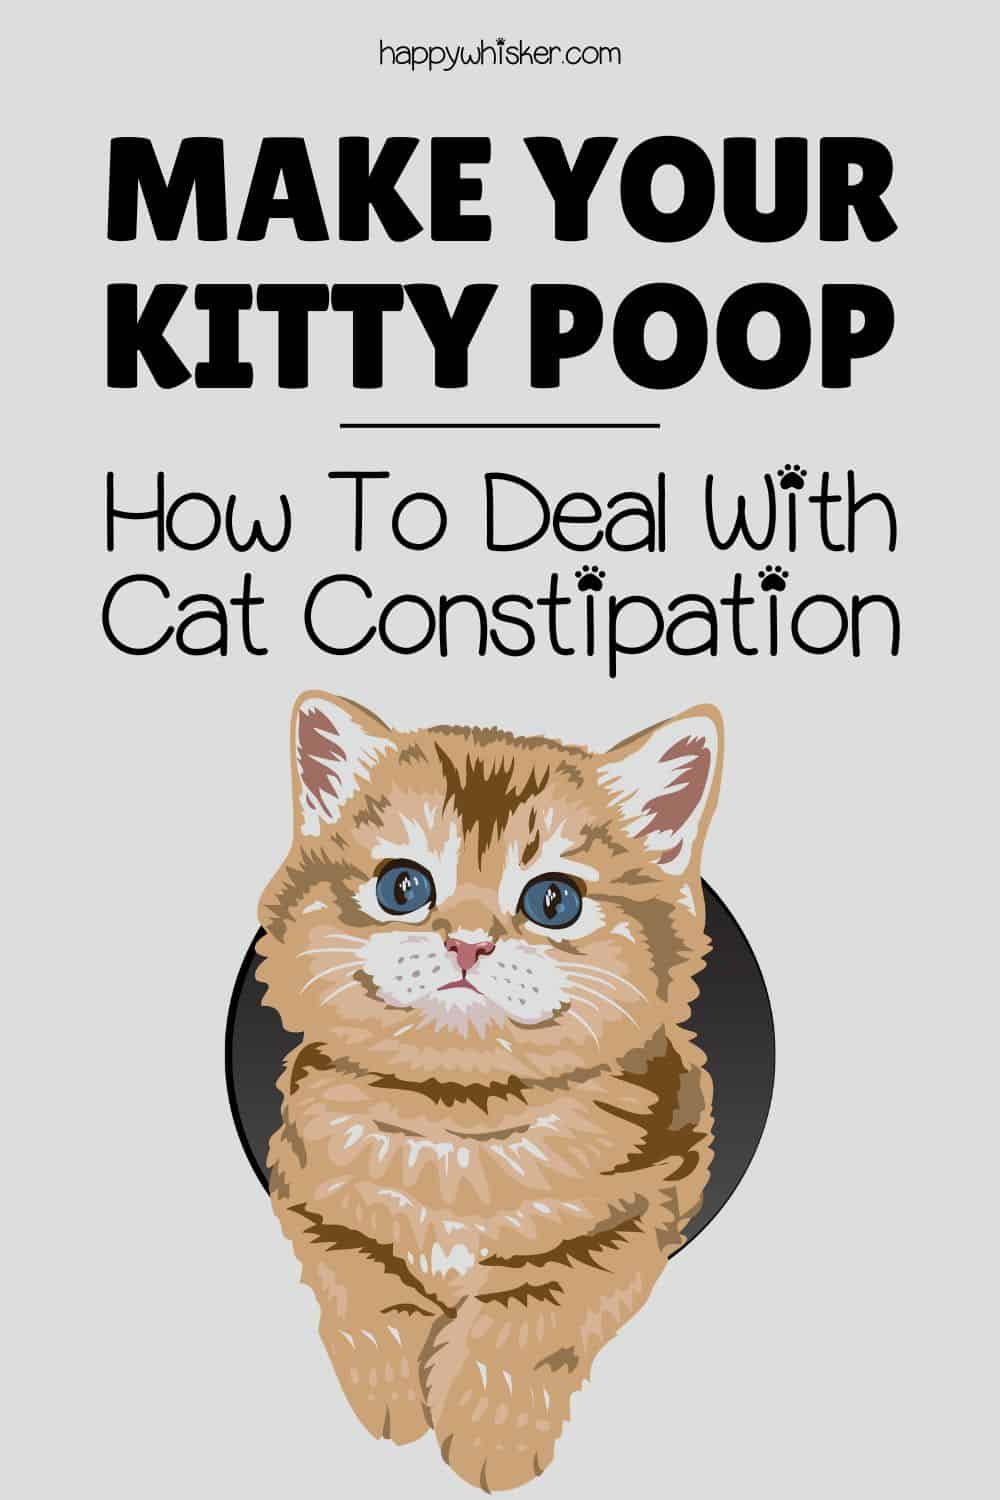 Make Your Kitty Poop - How To Deal With Cat Constipation Pinterest